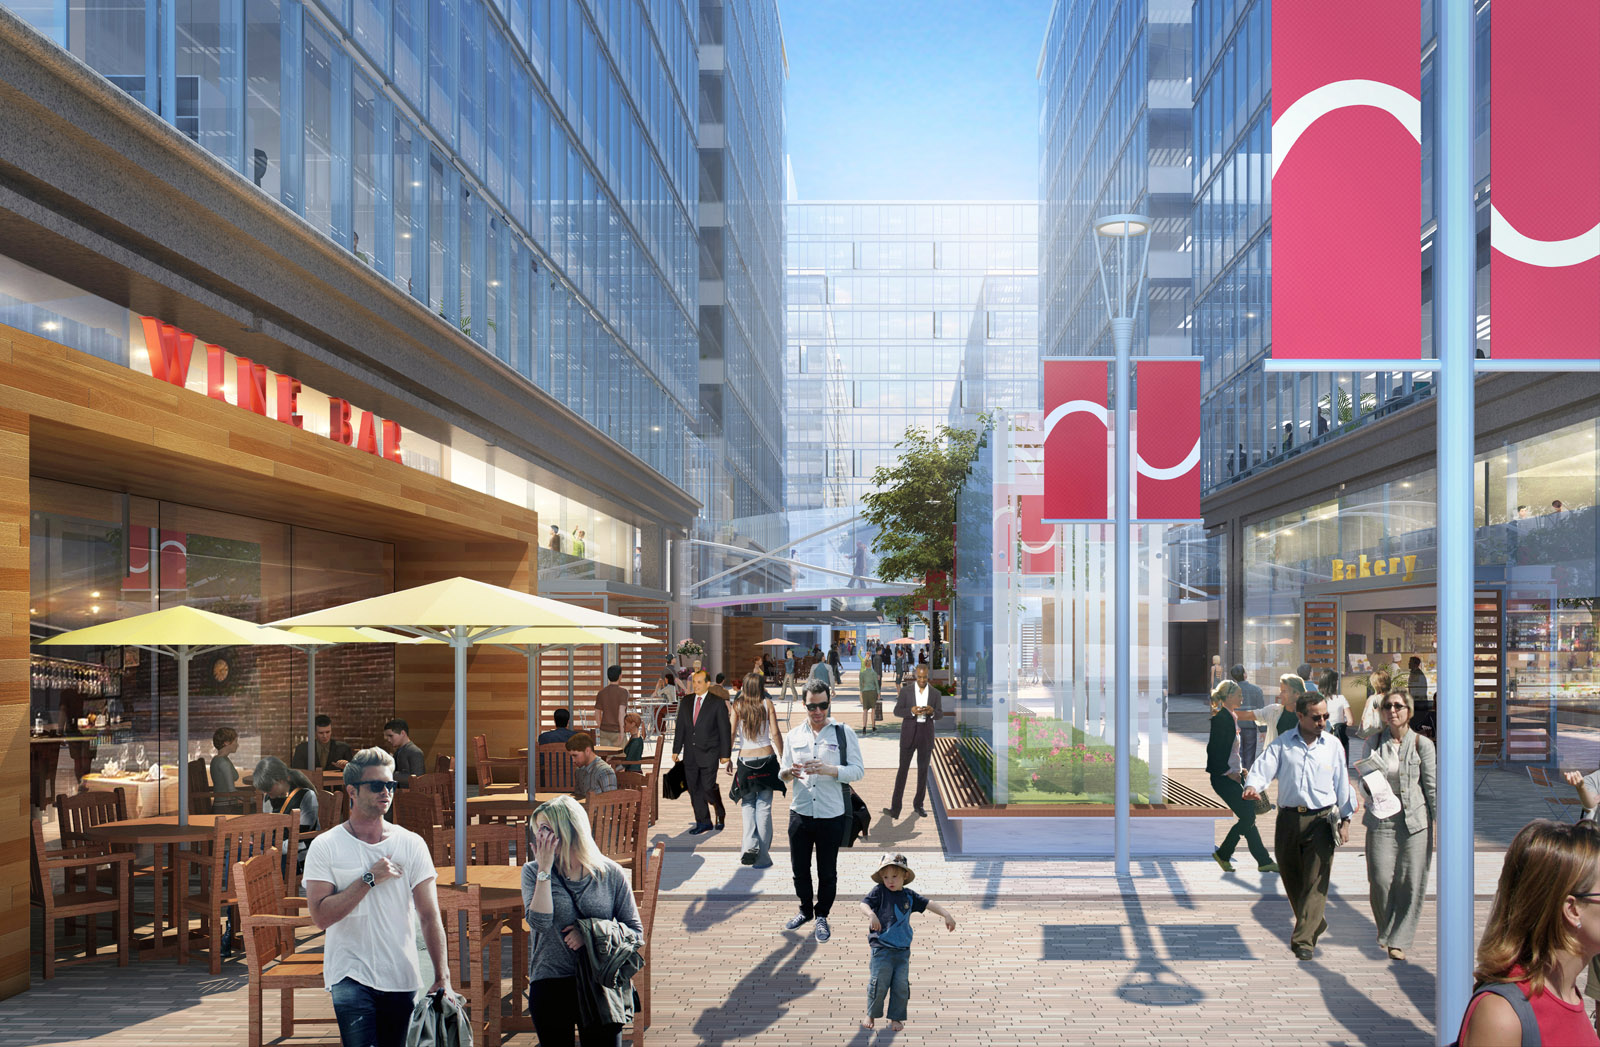 This artist's rendering shows the retail promenade between 200 and 250 Massachusetts Avenue. The new buildings will be constructed as part of the $1.3 billion Capitol Crossing. (Courtesy Property Group Partners)